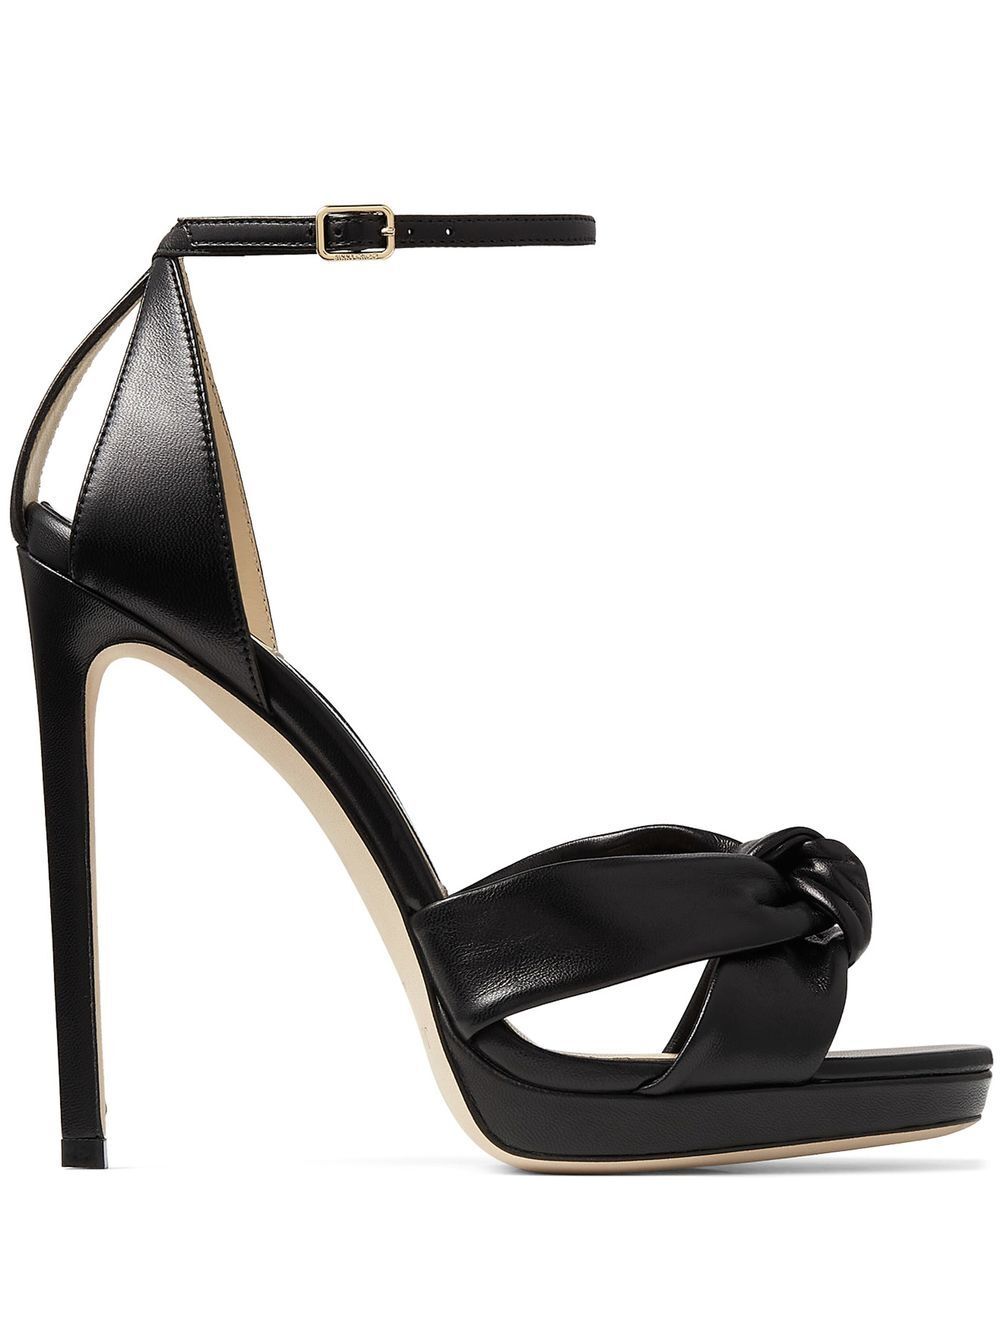 Jimmy Choo Rosie 120mm knotted sandals - Black